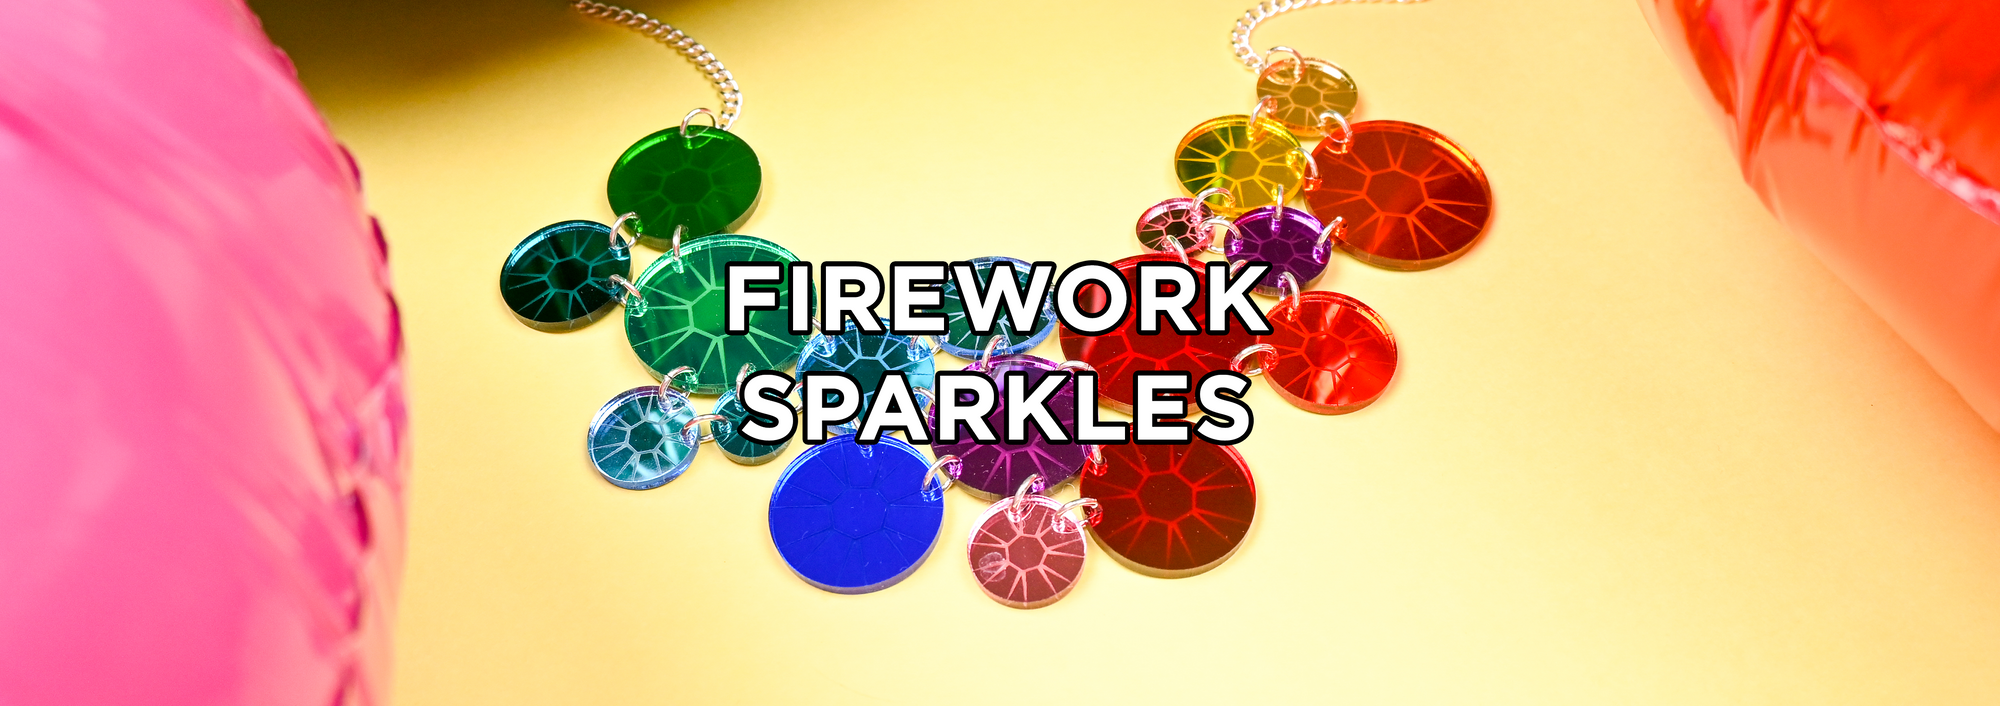 BACK WITH A BANG: Firework Sparkles
– Tatty Devine